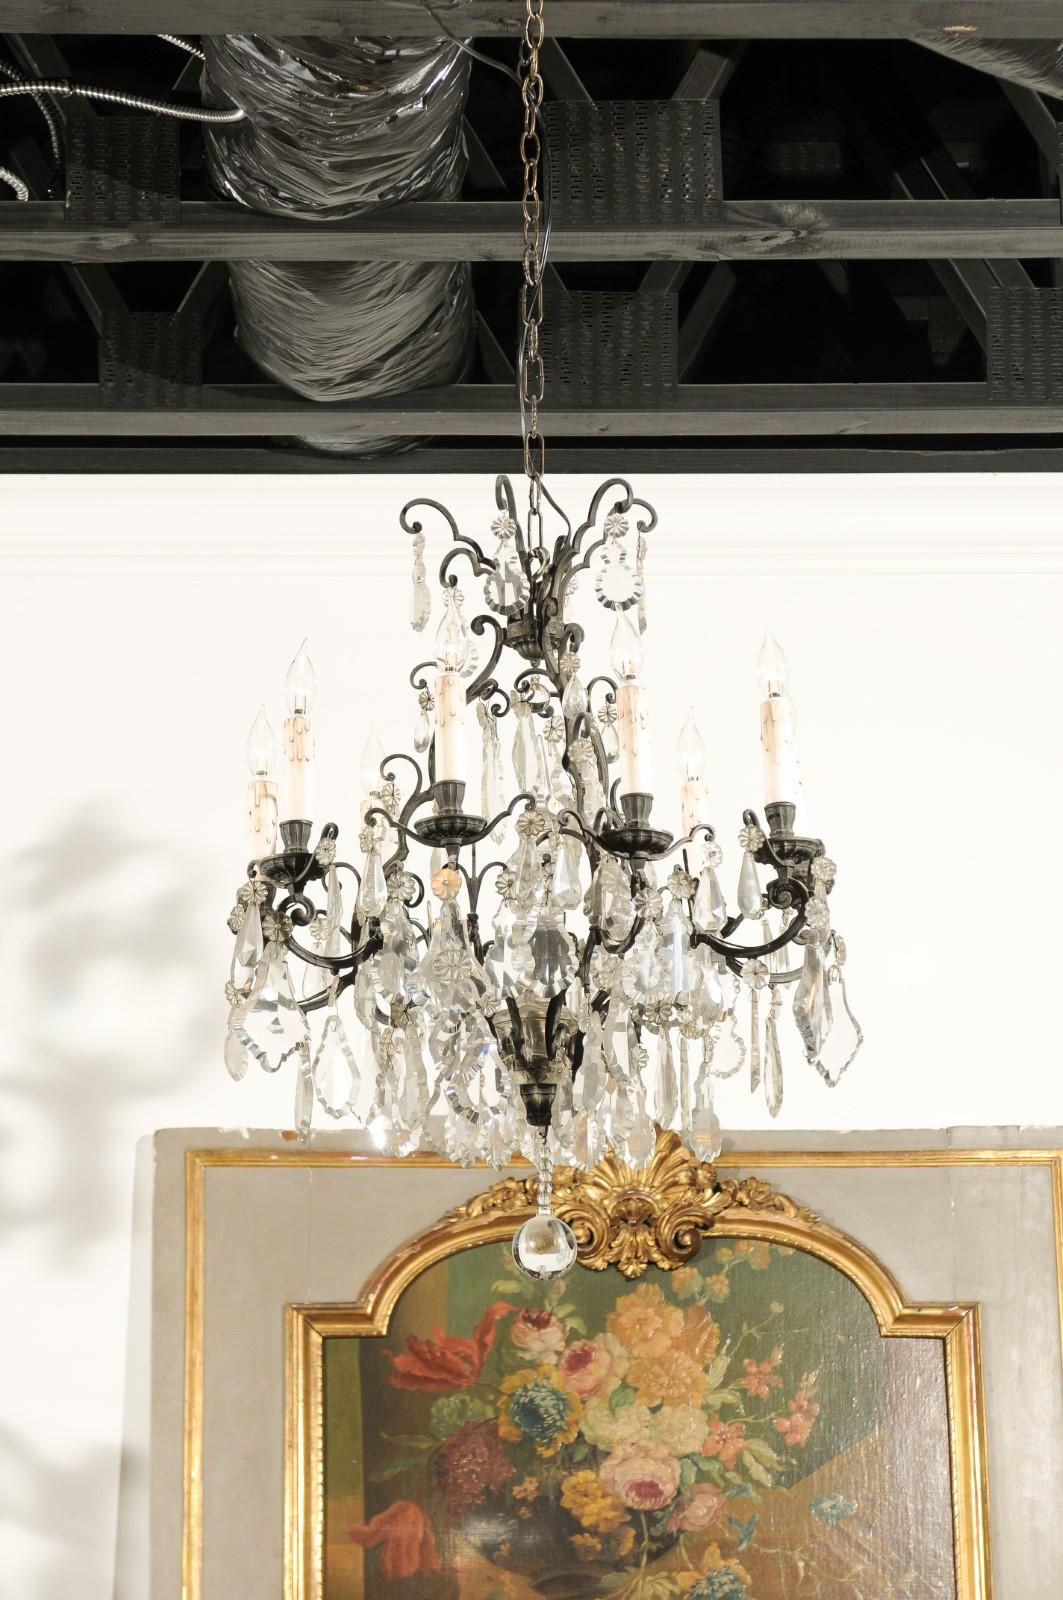 A French nine-light crystal chandelier from the late 19th century, with iron armature and pendeloques. Born in France during the later years of the 19th century, this handsome chandelier features an iron armature supporting pendeloques and rosettes.